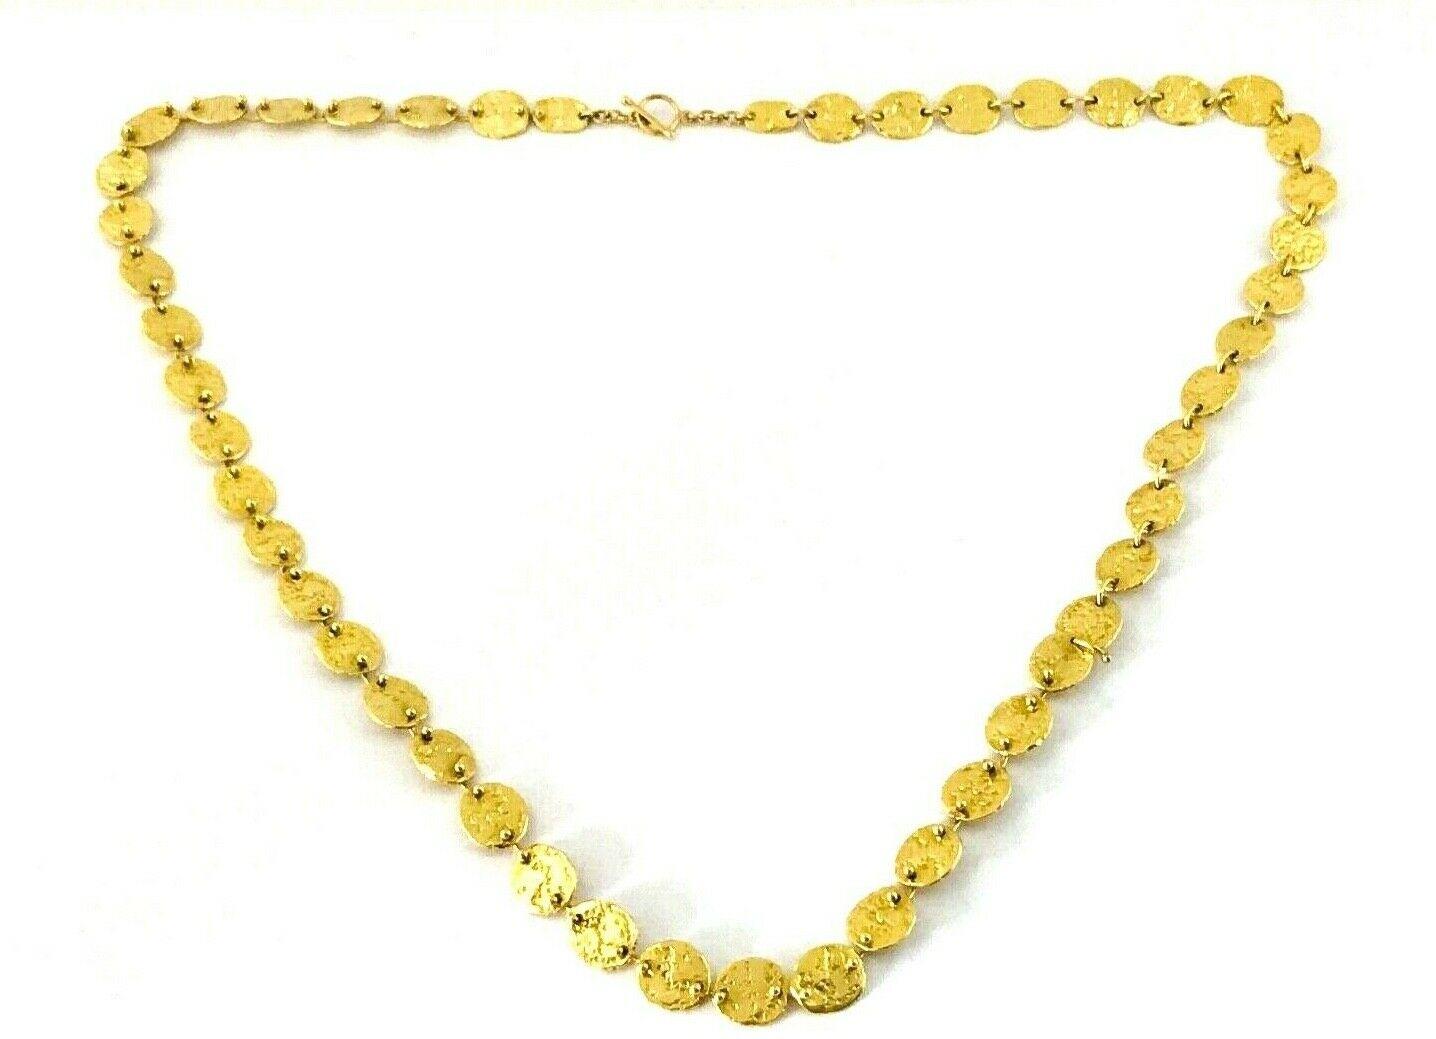 An 18k hammered yellow gold chain necklace by Jennifer Meyer. 
Consists of hammered gold scales connected with each other by the tiny gold wires. 
Features toggle clasp. Stamped with the Jennifer Meyer maker's mark and a hallmark for 18k